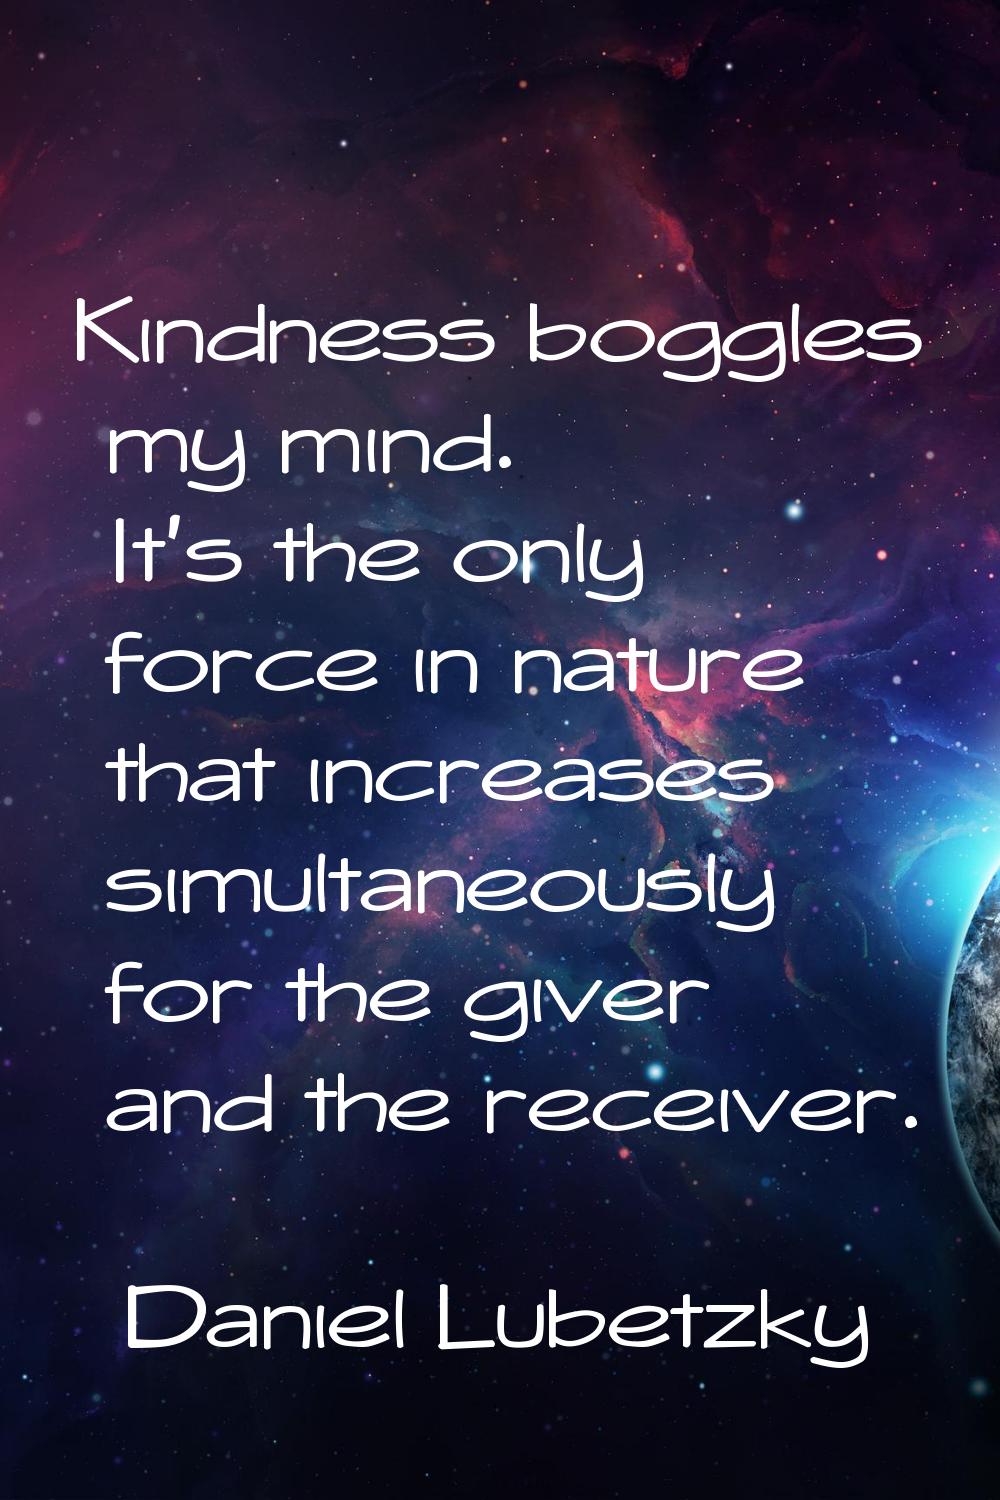 Kindness boggles my mind. It's the only force in nature that increases simultaneously for the giver